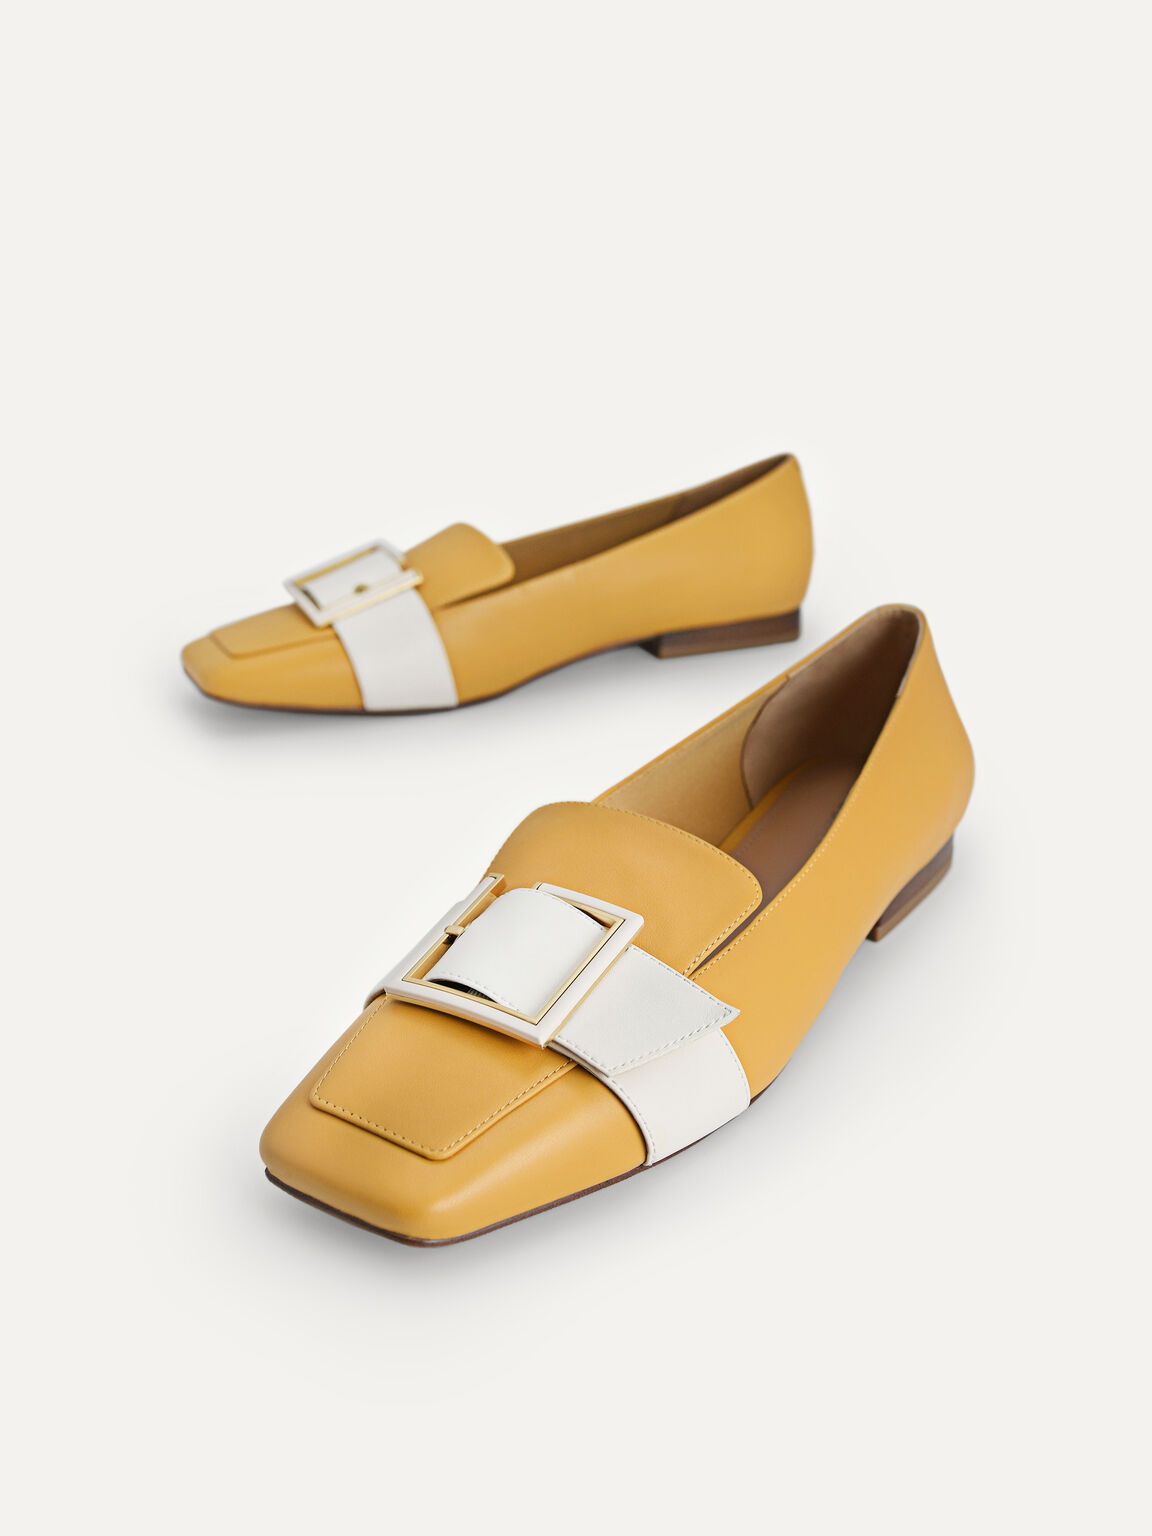 Oversized Buckle Leather Flats, Mustard, hi-res